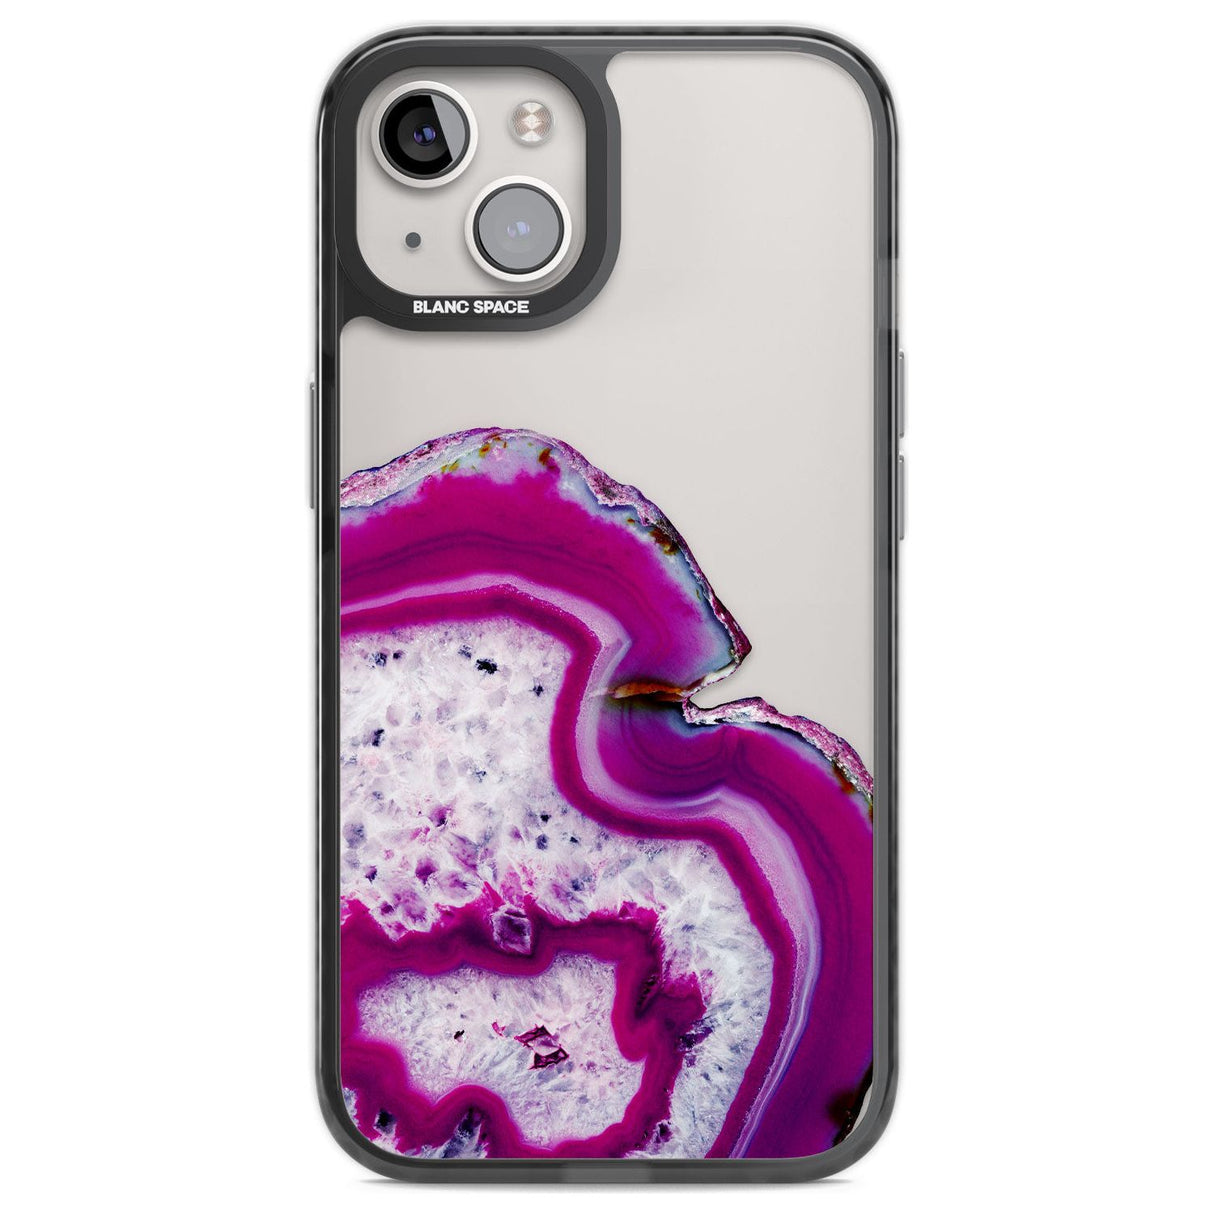 Violet & White Swirl Agate Crystal Clear Design